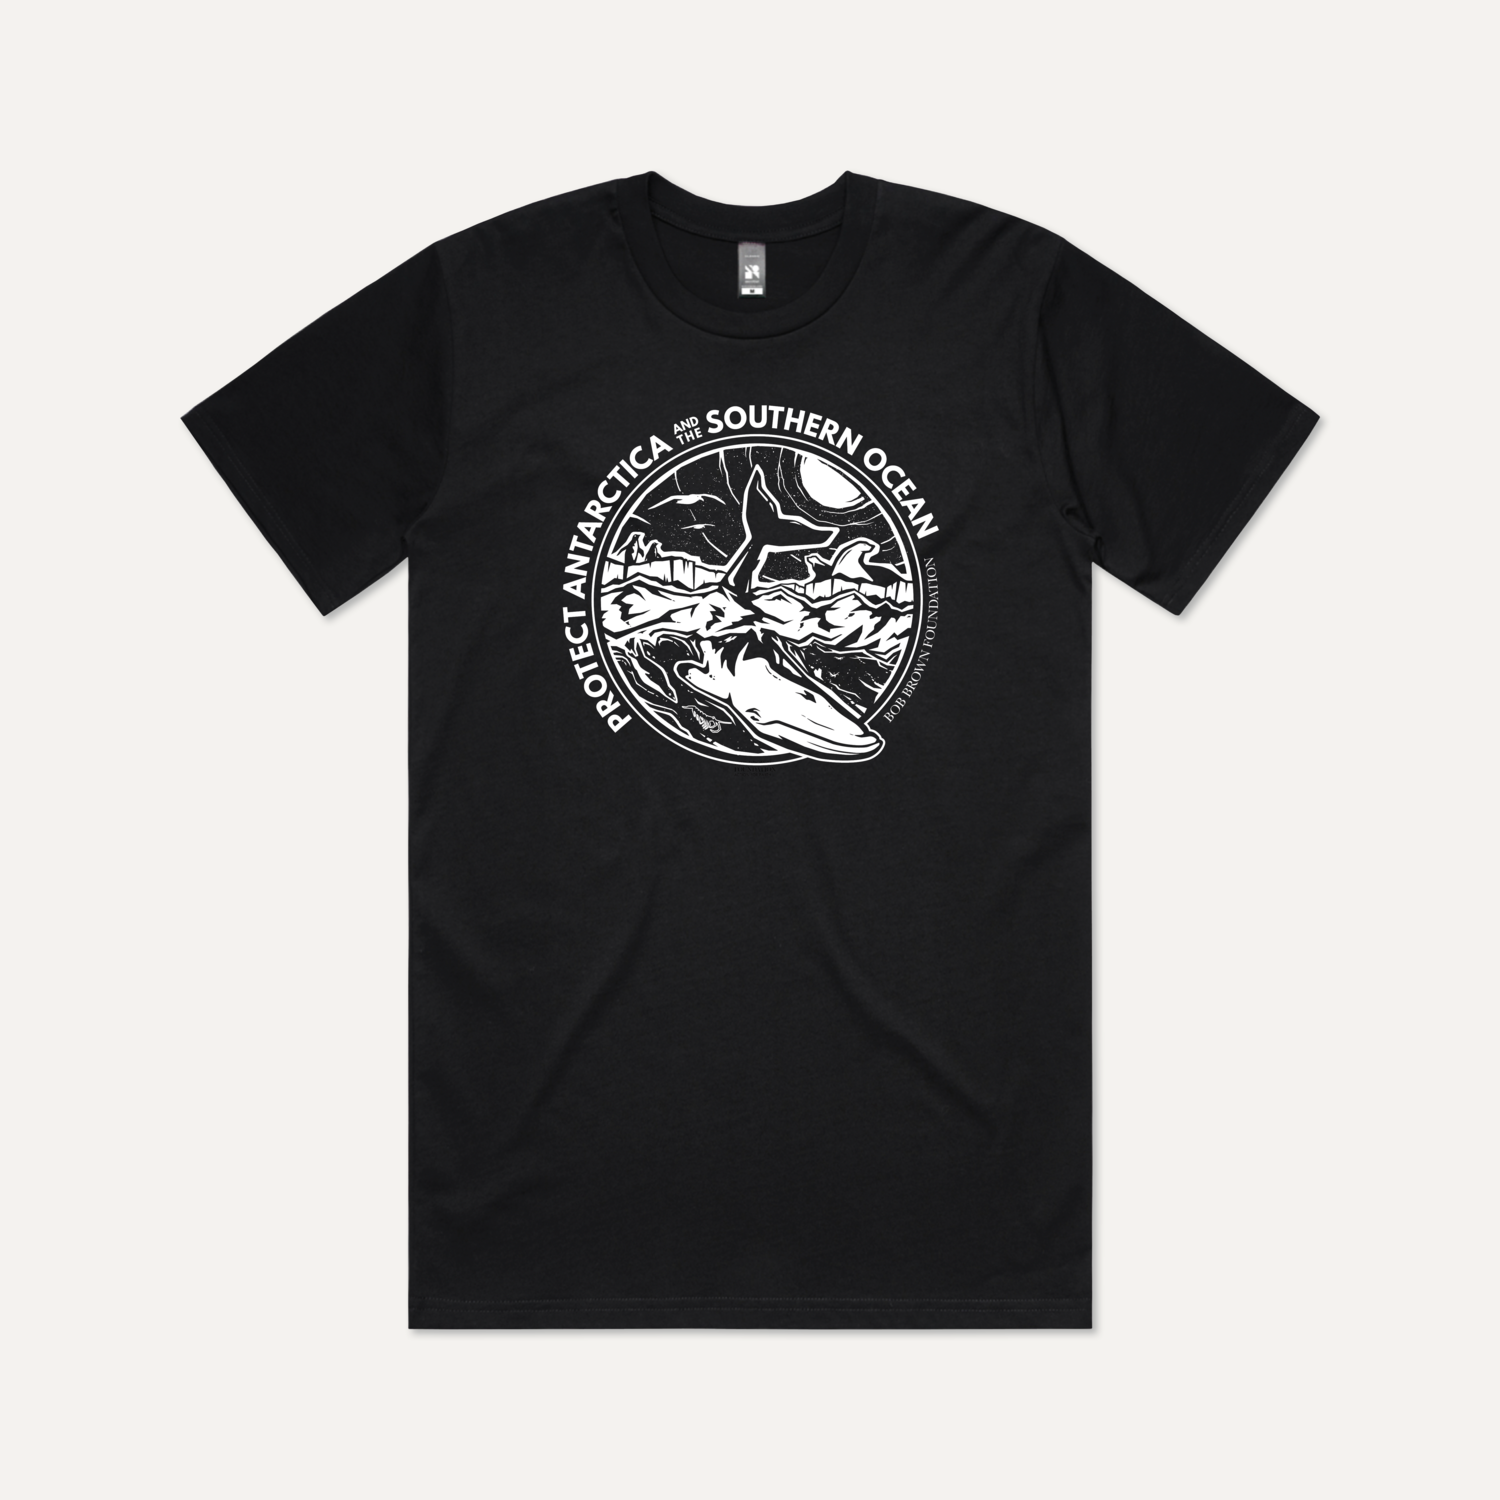 Protect Antarctica and the Southern Ocean tee